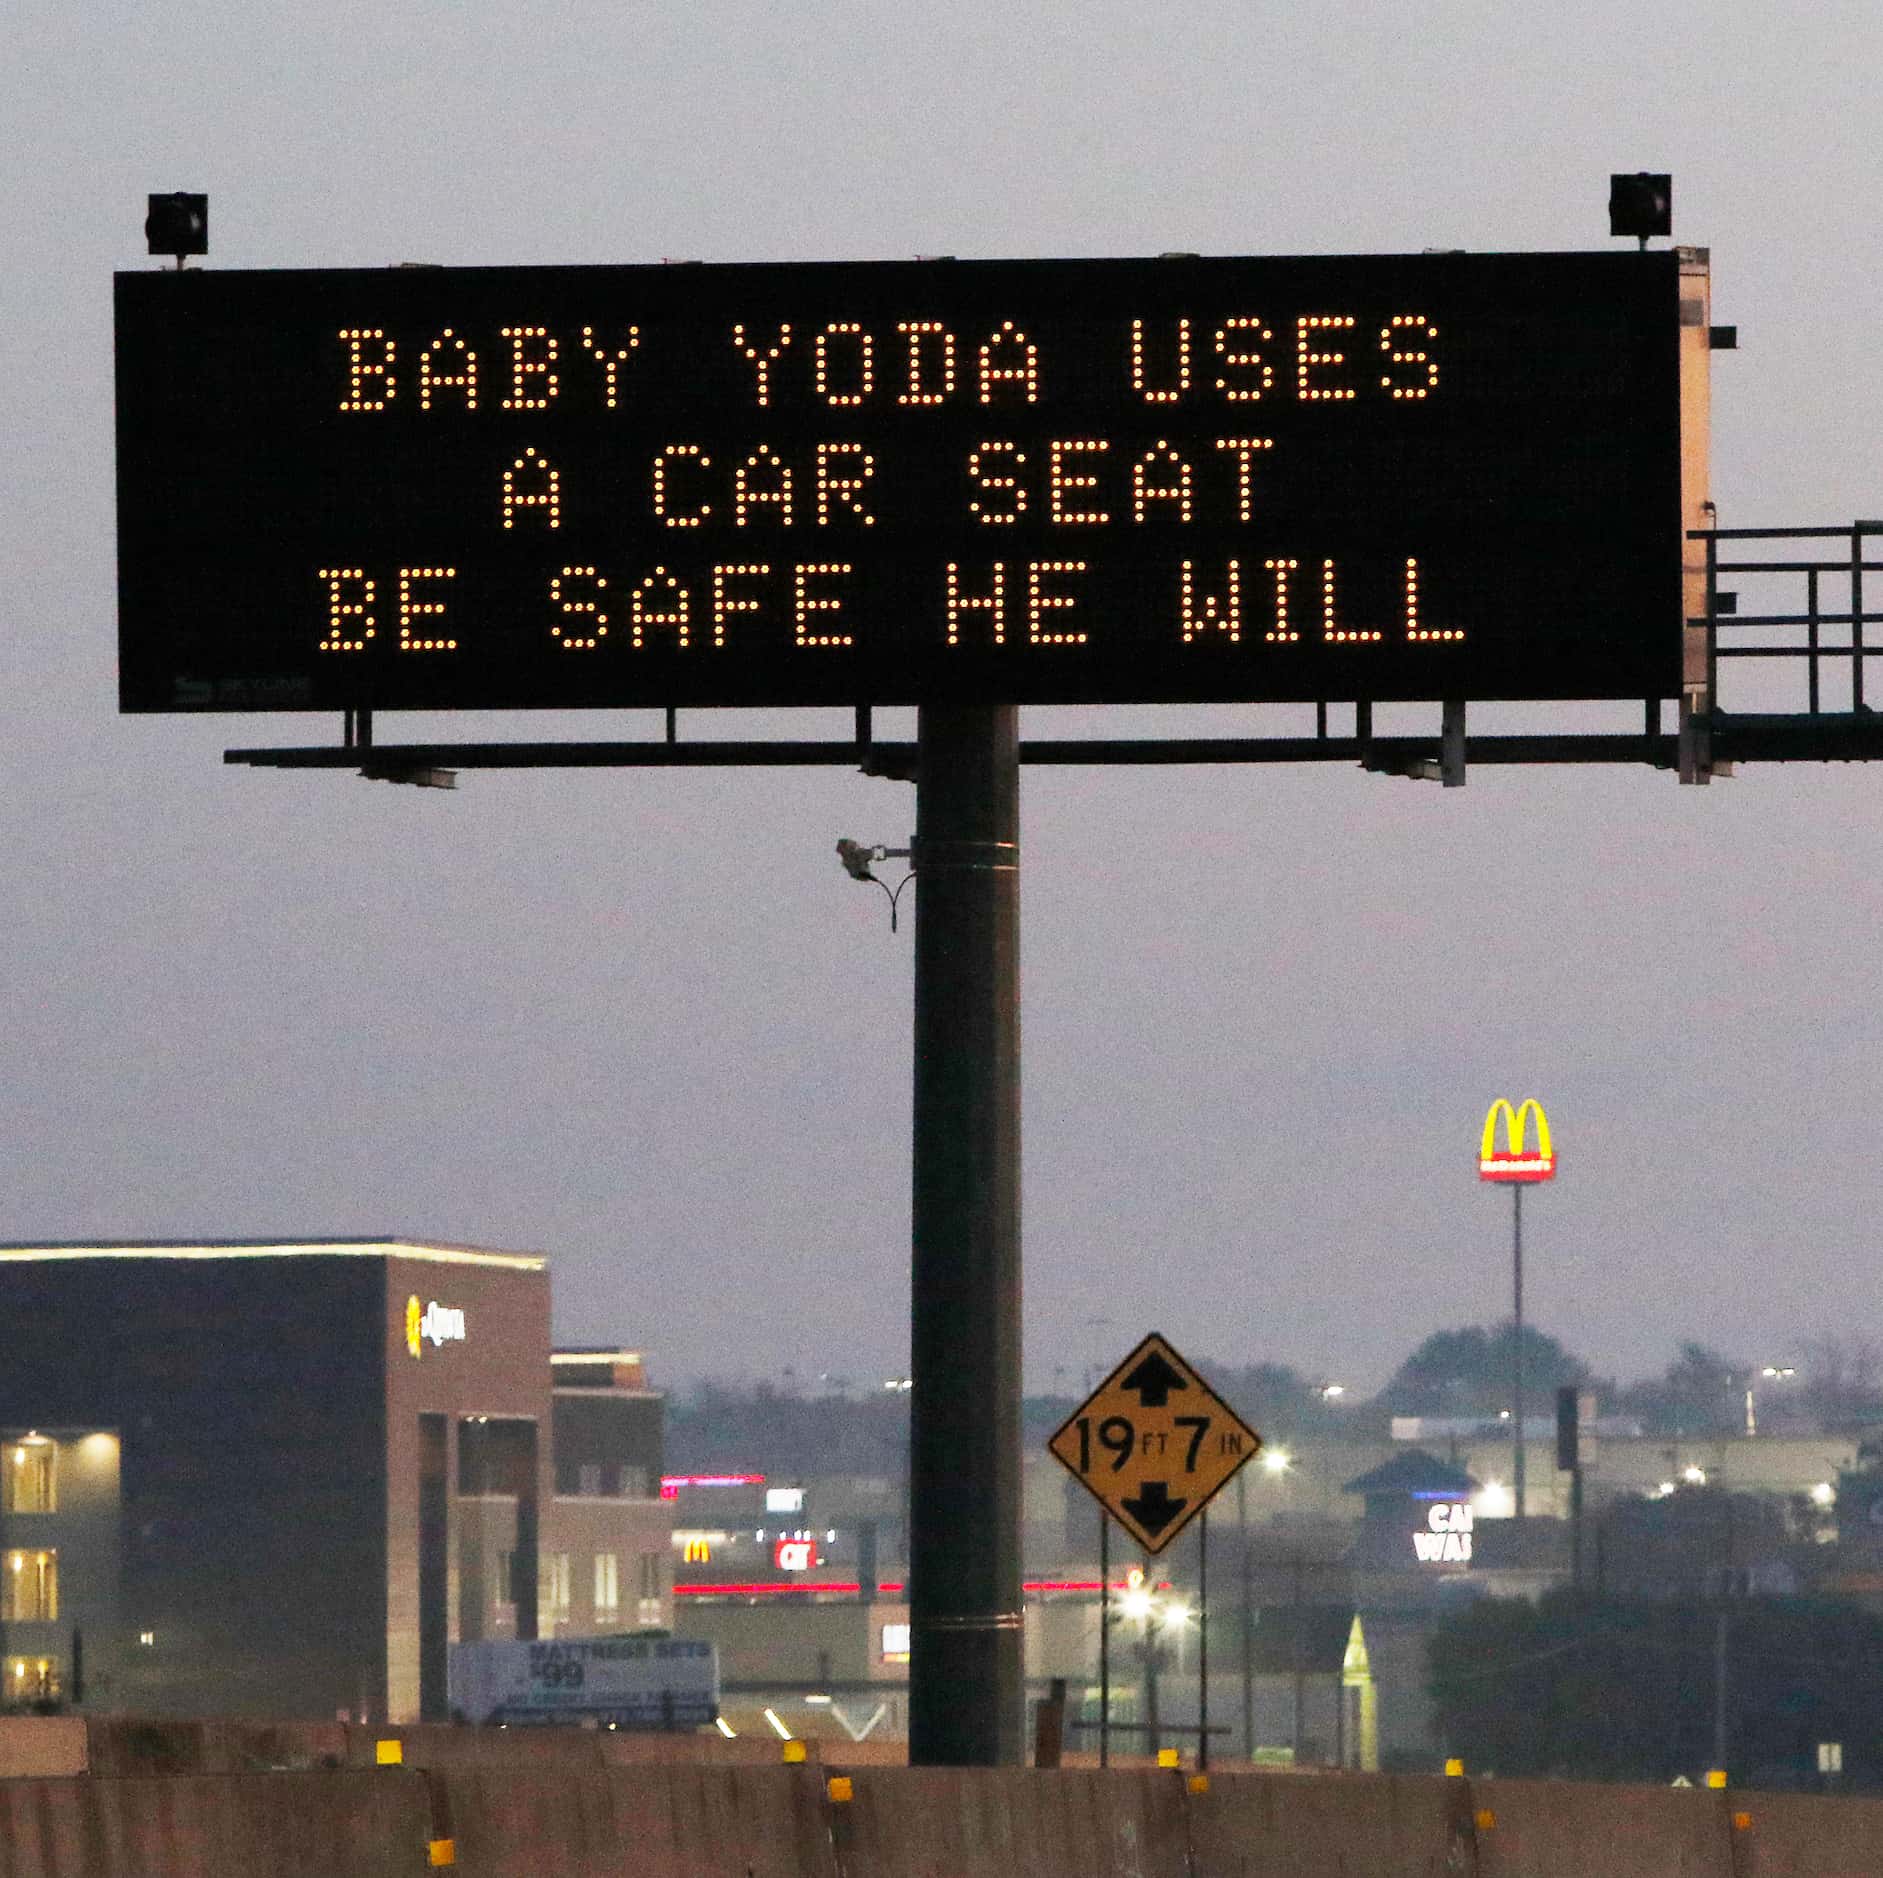 TXDOT's Safe Driver sign" BABY YODA USES A CAR SEAT BE SAFE HE WILL" on Highway 67 in Dallas...